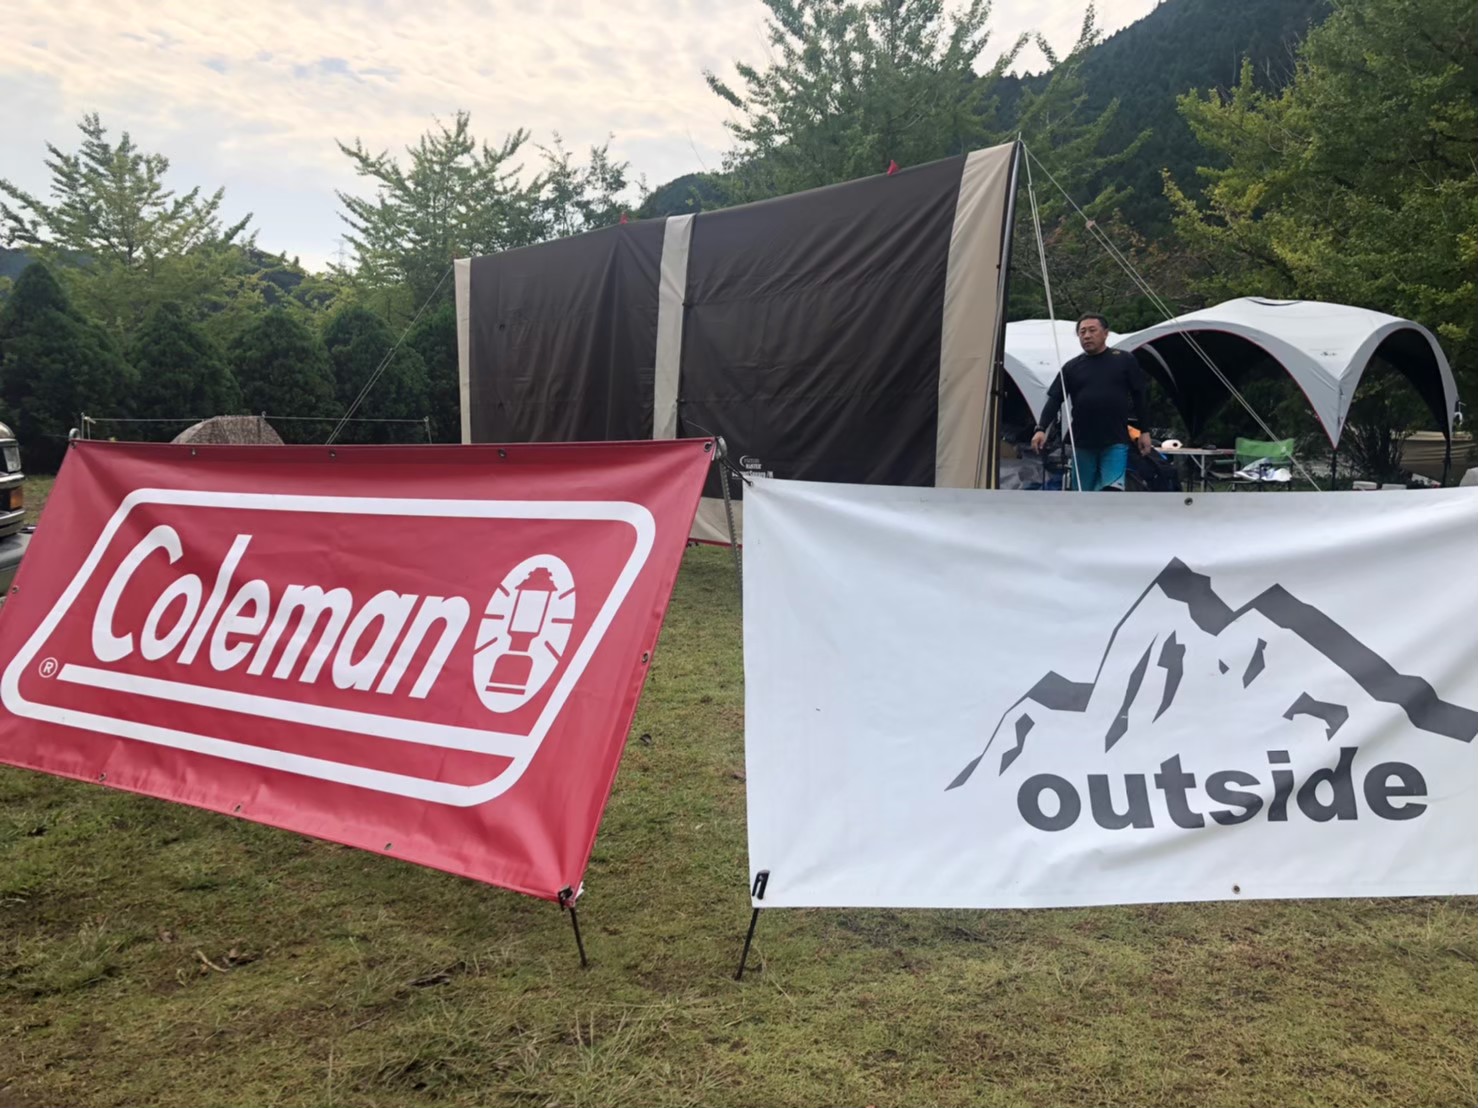 Read more about the article Coleman×outsideTOUR はじめてのキャンプ開催のお知らせ！！